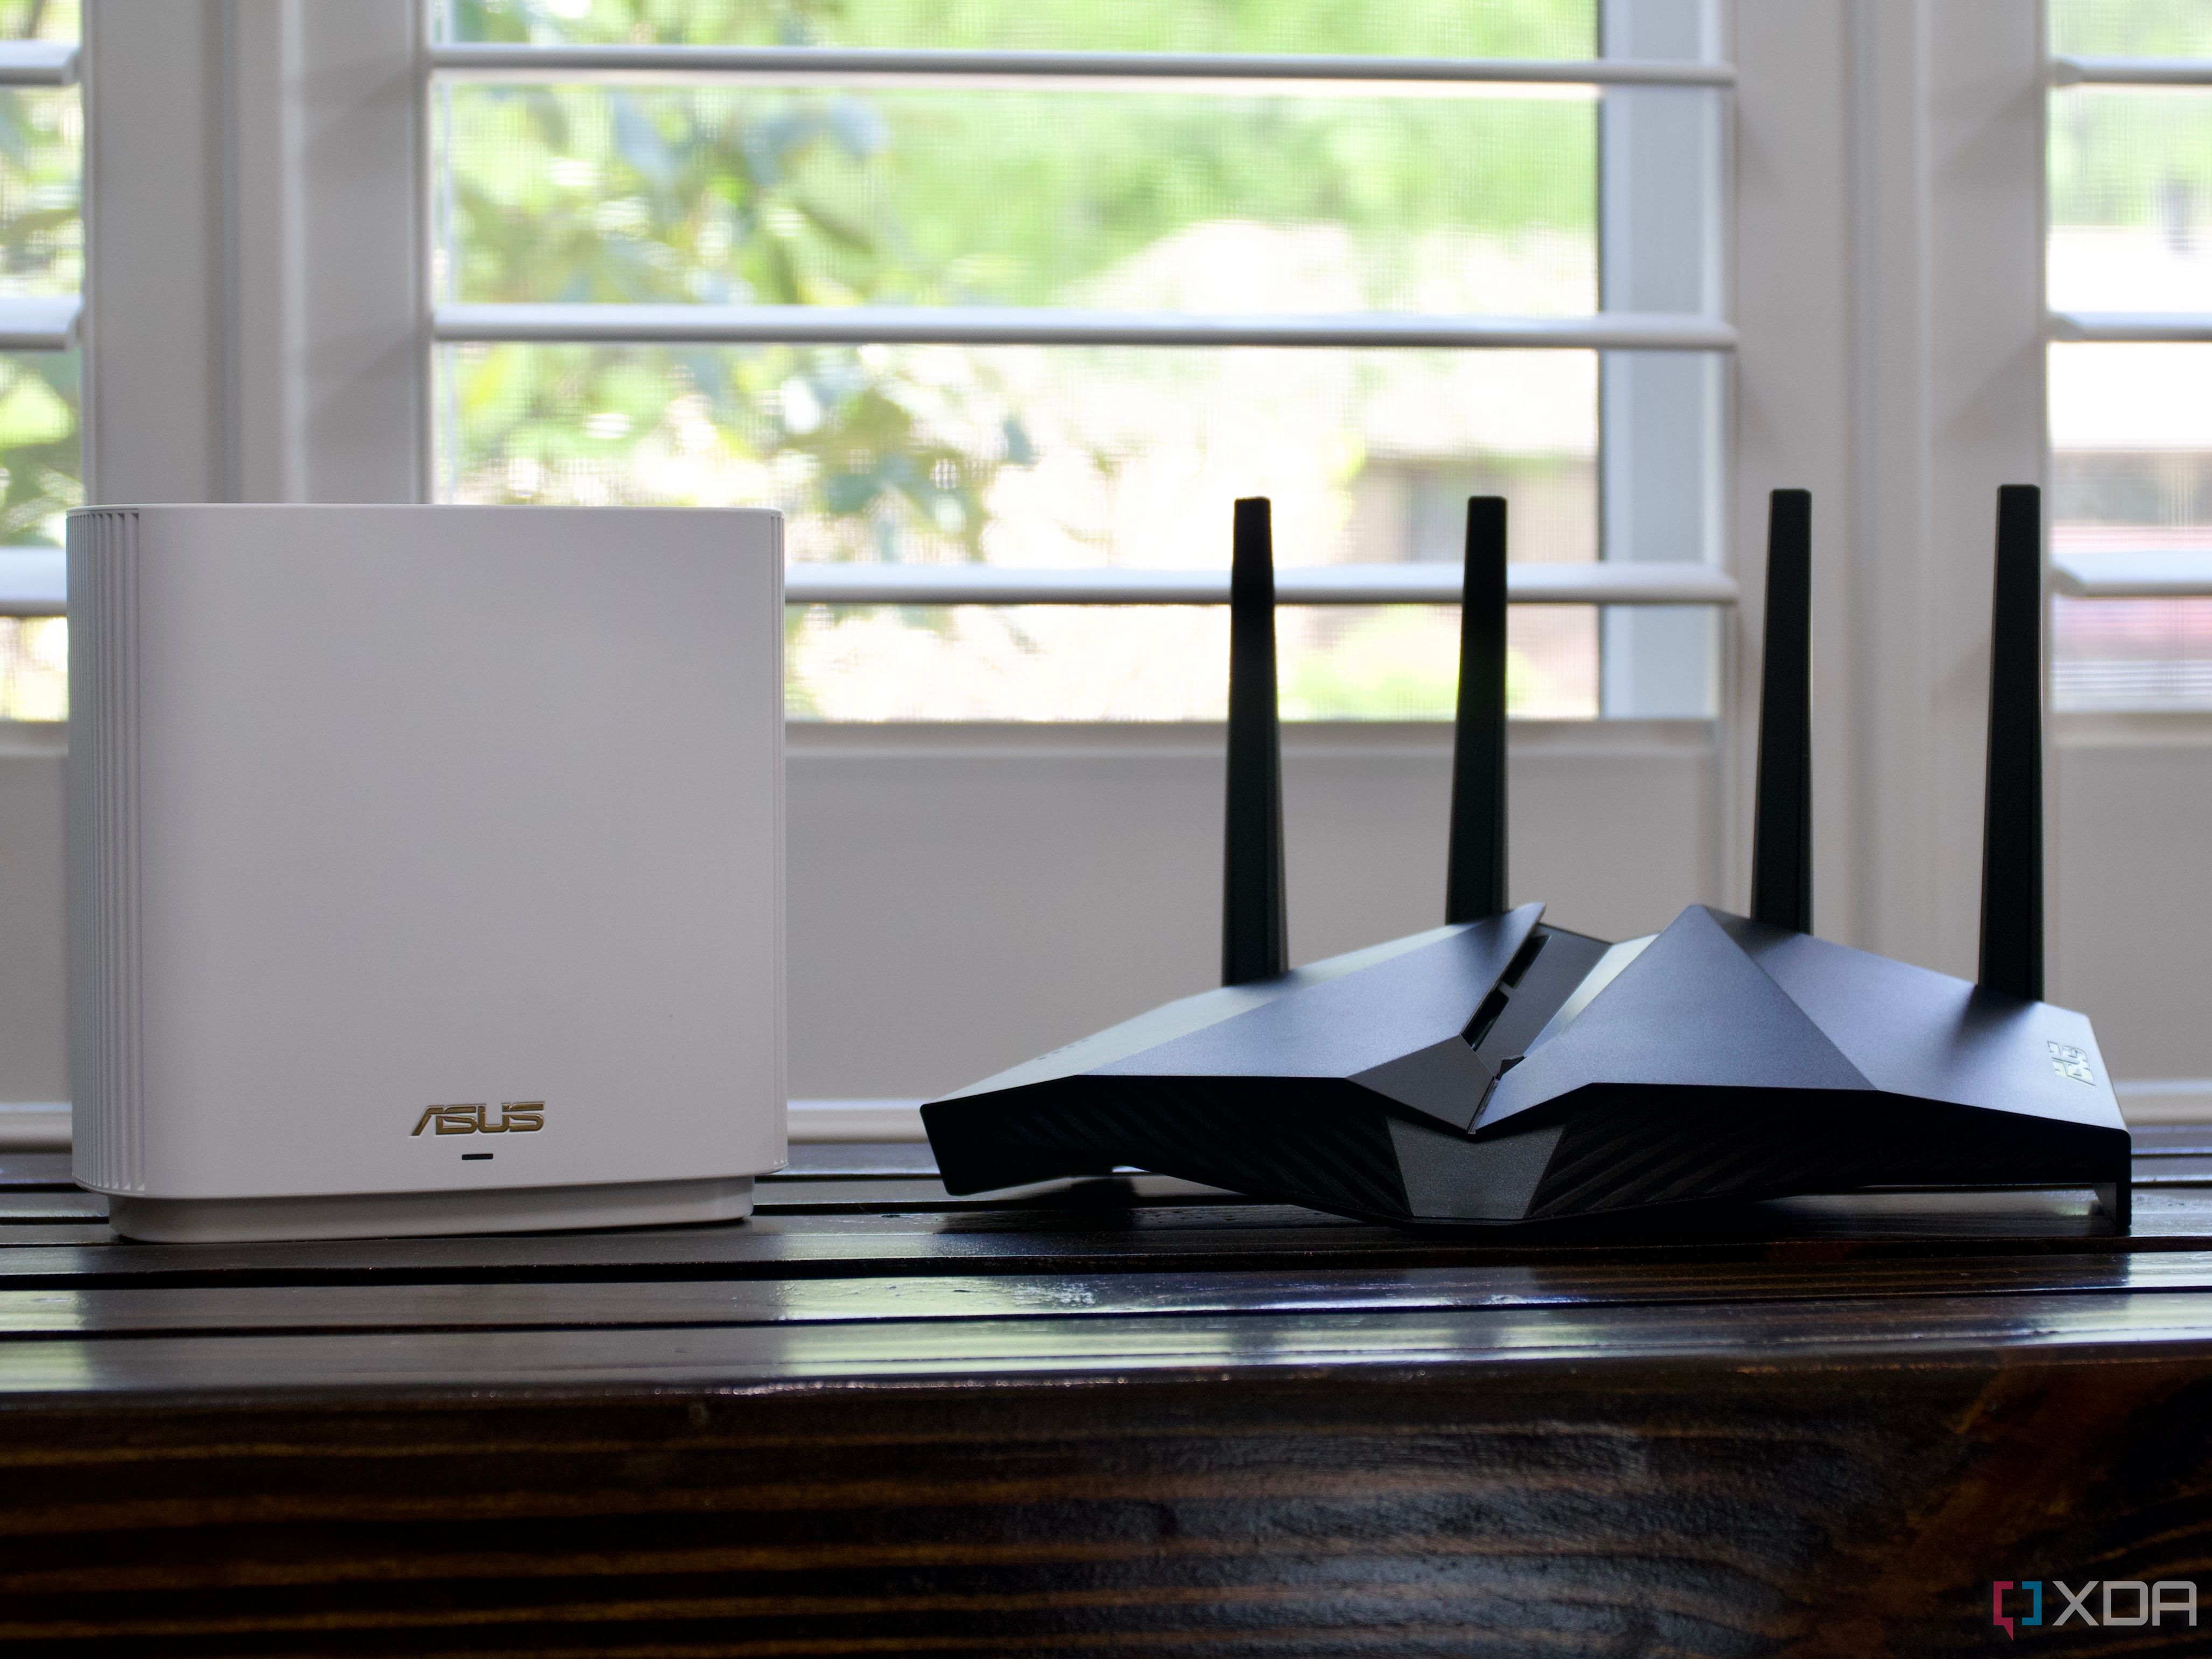 ASUS ZenWiFi ET8 router and AX82U on a bench